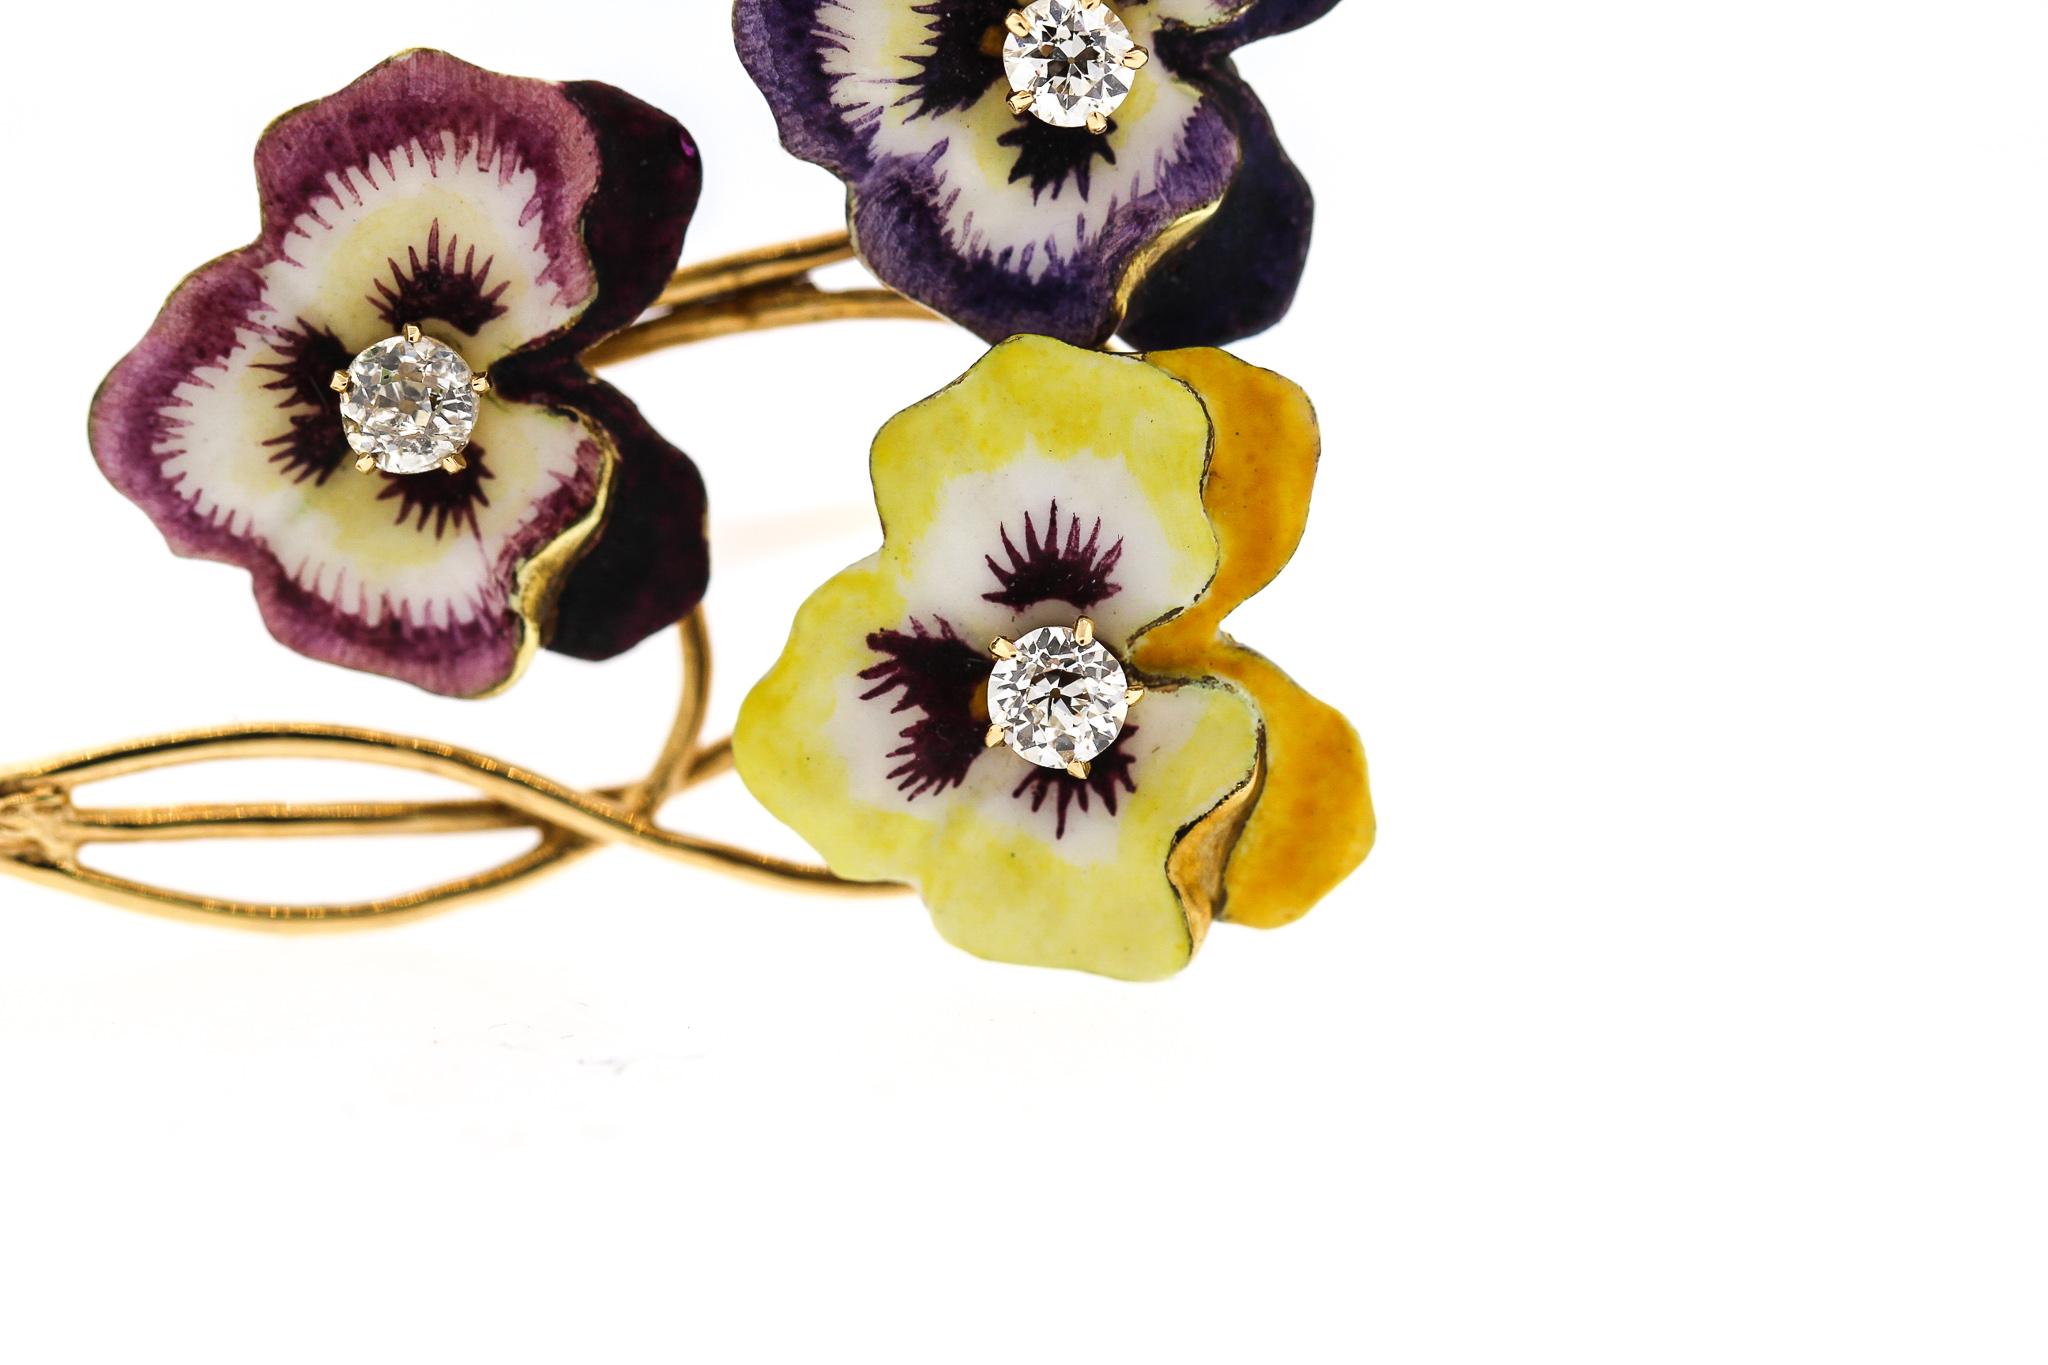 A vintage three pansy flower brooch set with old cut diamonds on 14k gold, circa 1950. A yellow and two purple pansies are set with old cut round diamonds weighing about 0.12 ct each (0.36 ct total). The pansies are enamel on 14k gold and long stems